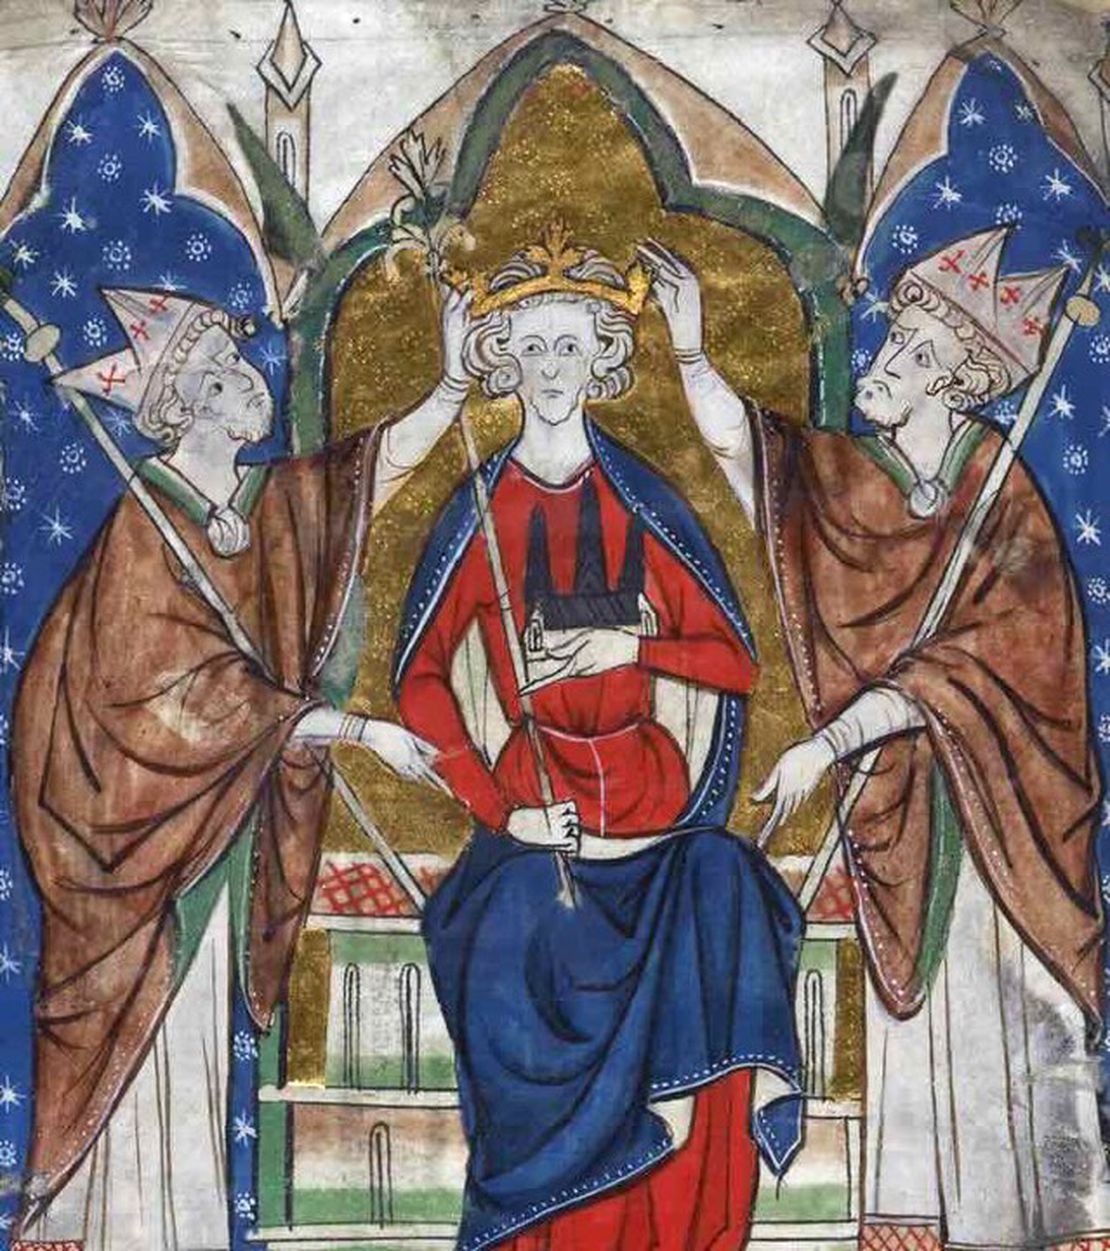 Henry III, the King of England, Lord of Ireland, and Duke of Aquitaine dies